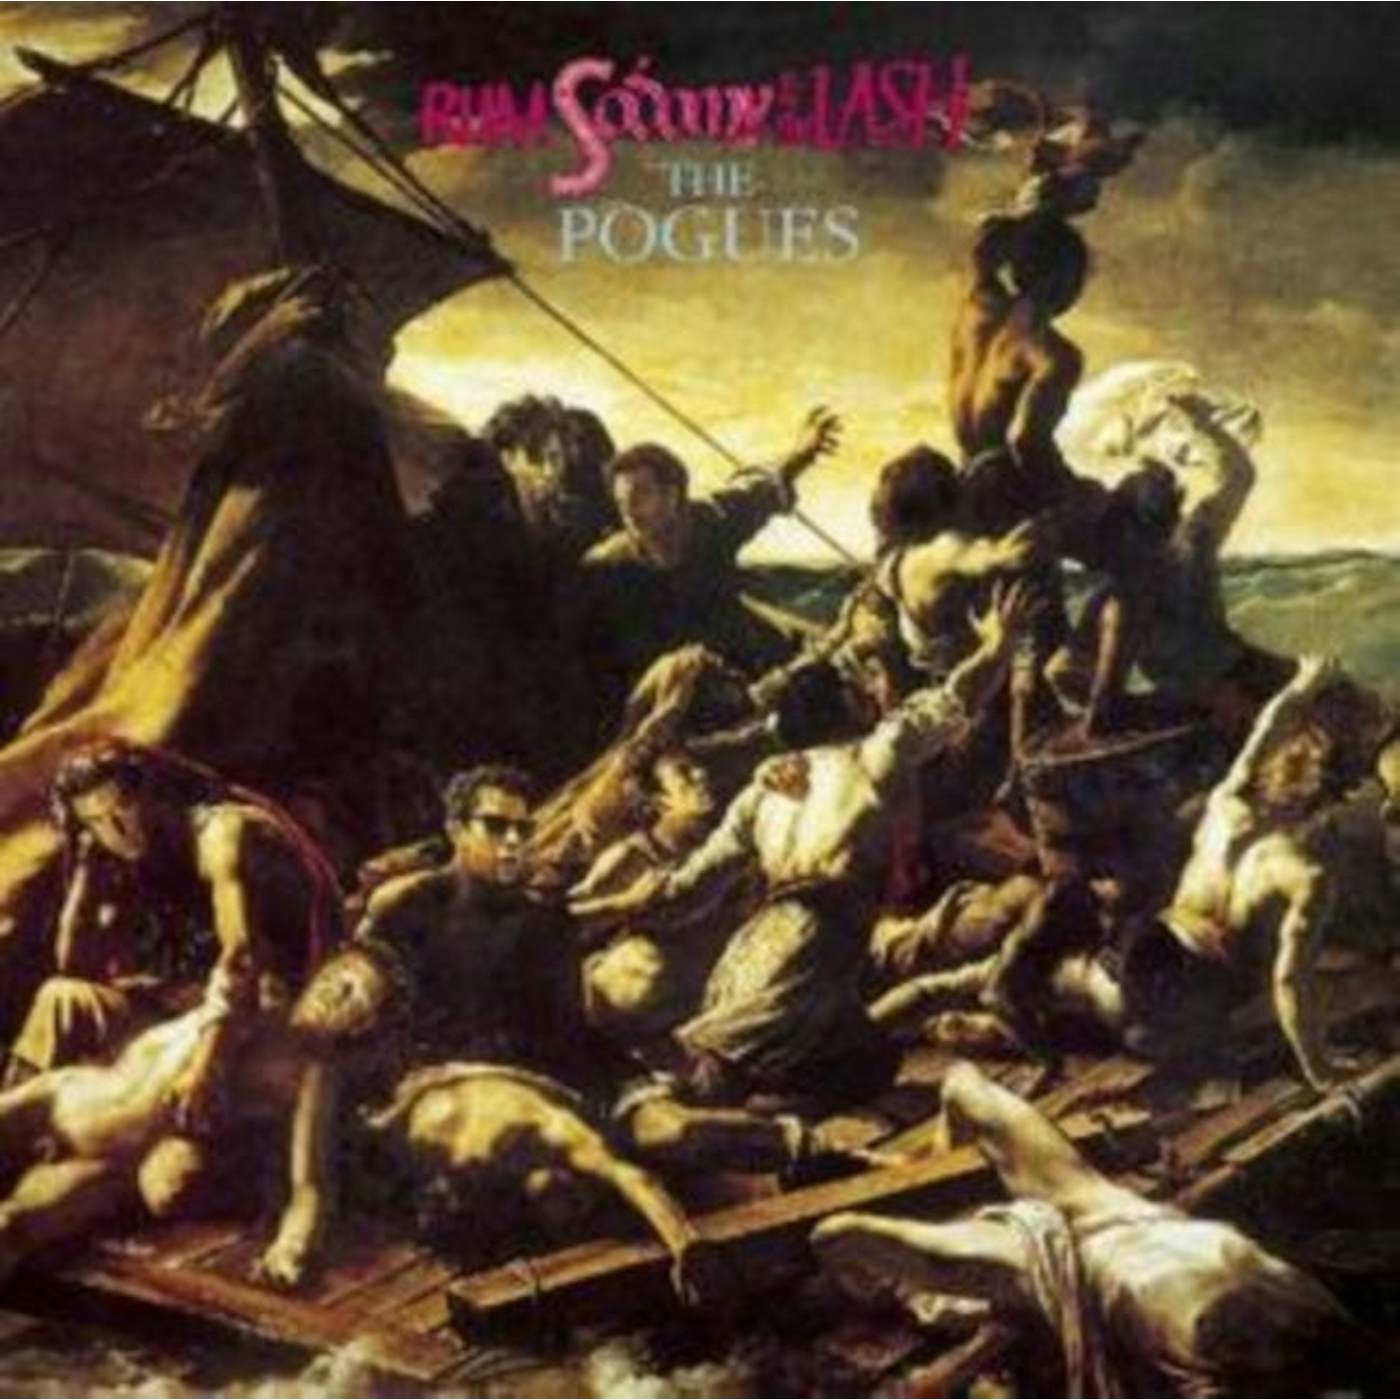 The Pogues CD - Rum Sodomy & The Lash